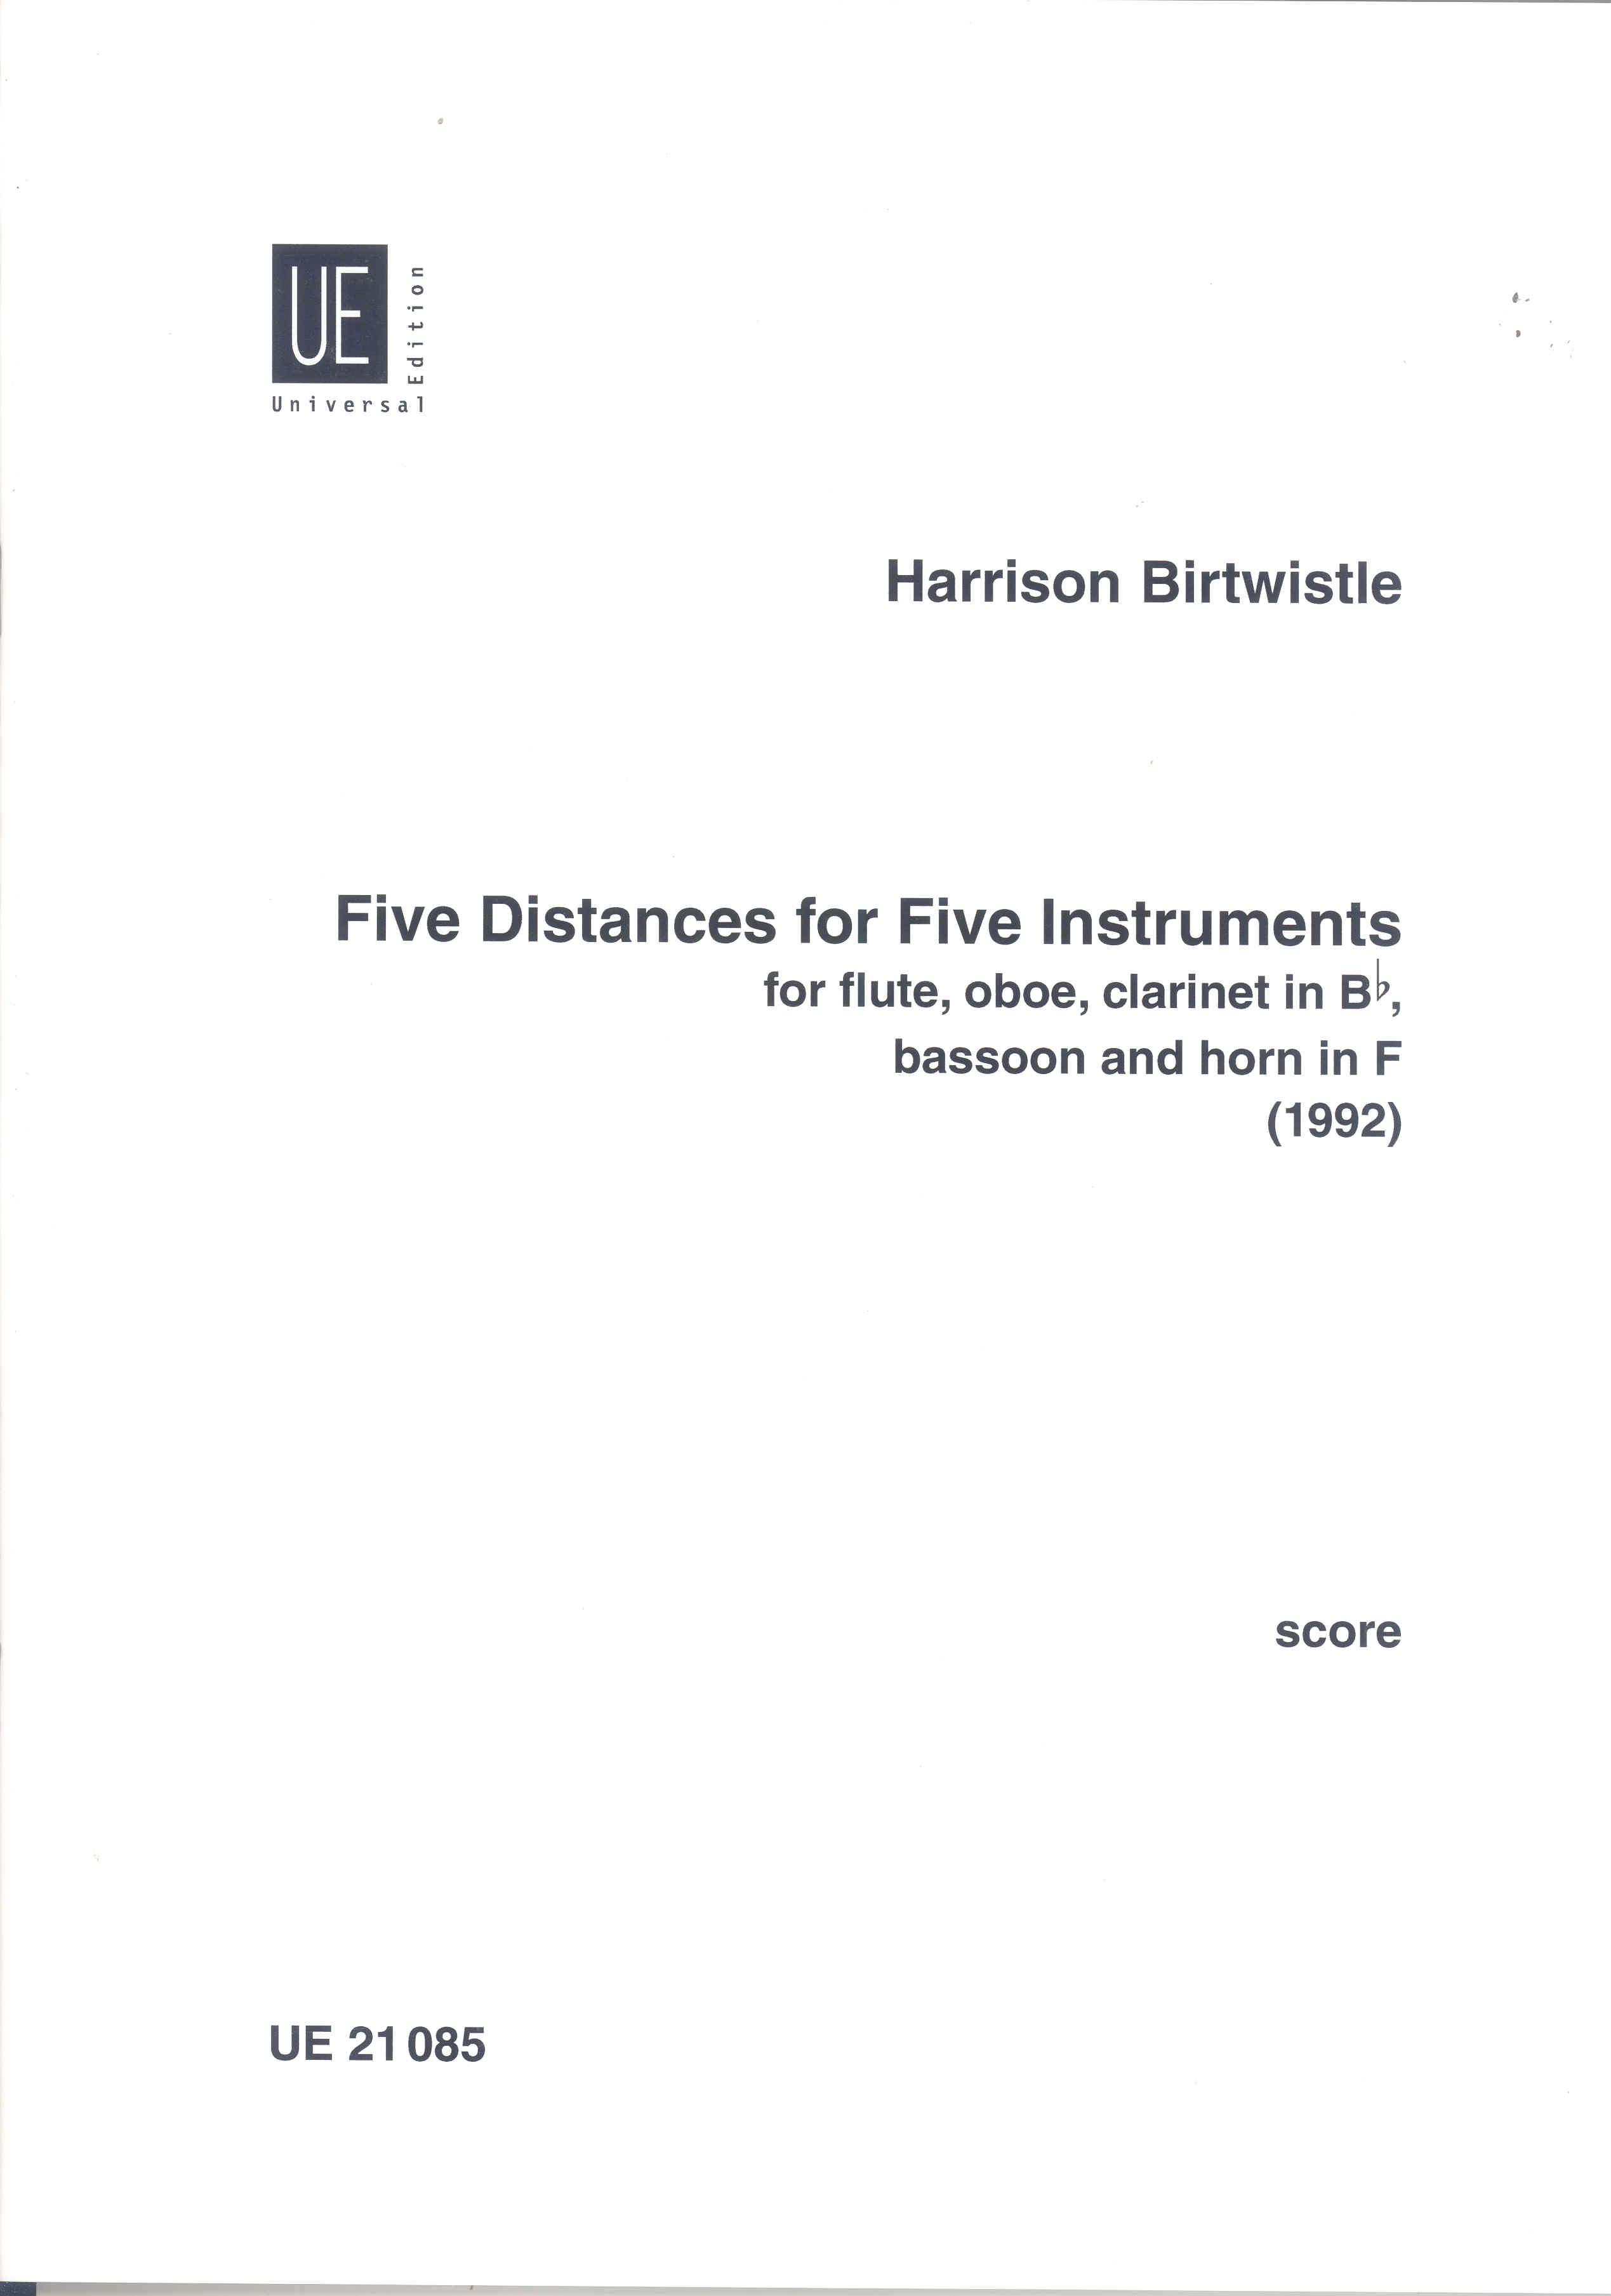 Birtwistle 5 Distances For 5 Instruments Score Sheet Music Songbook